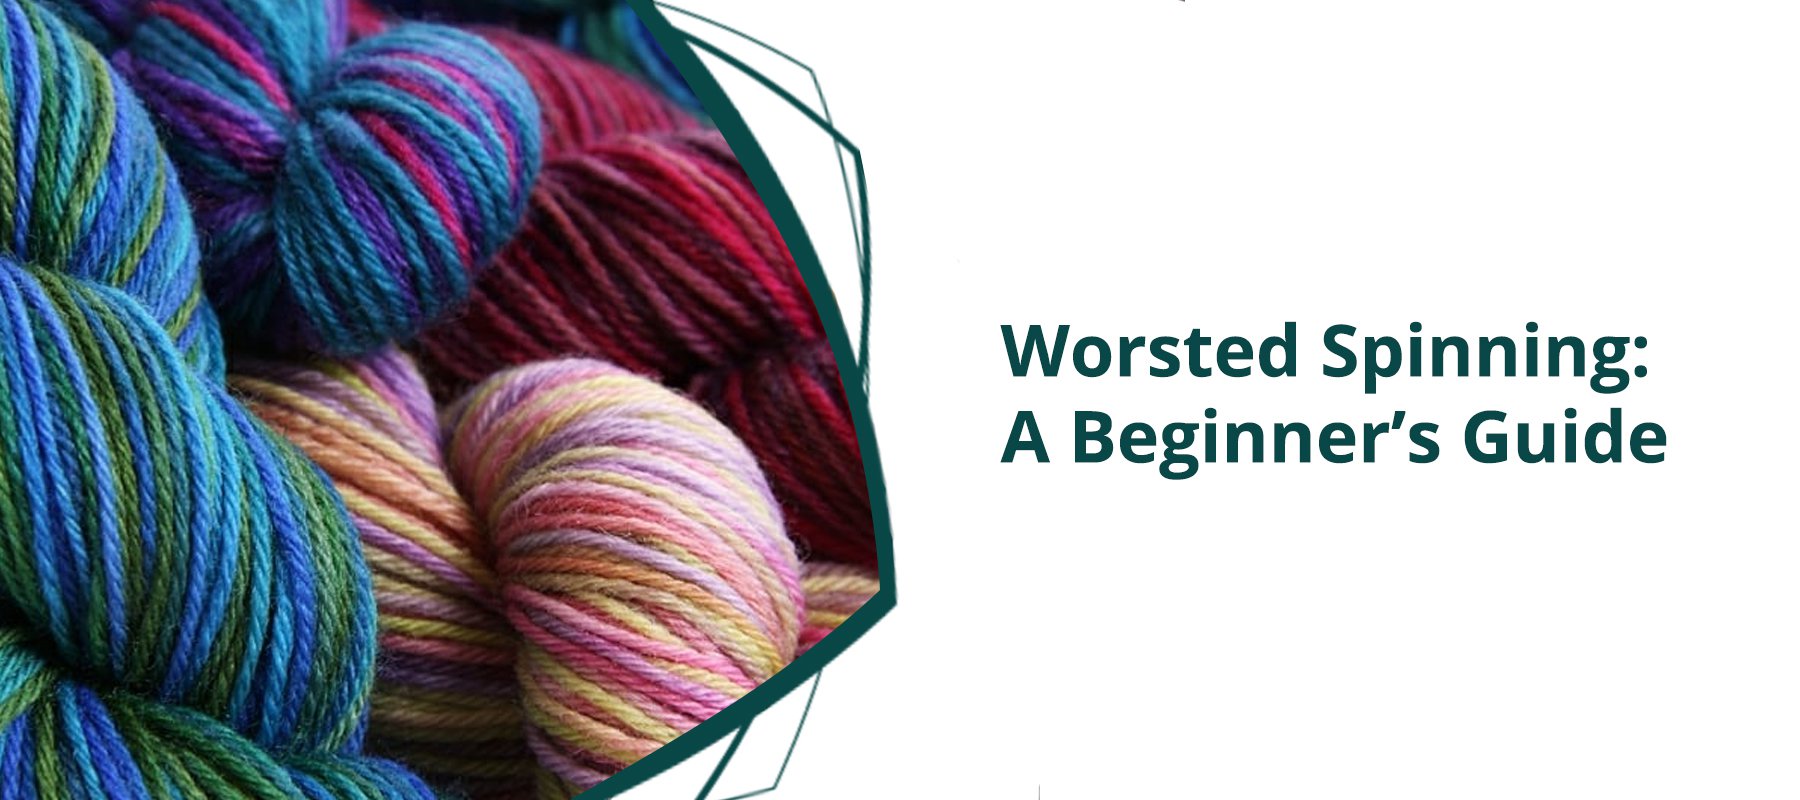 Worsted Spinning: A Beginner's Guide